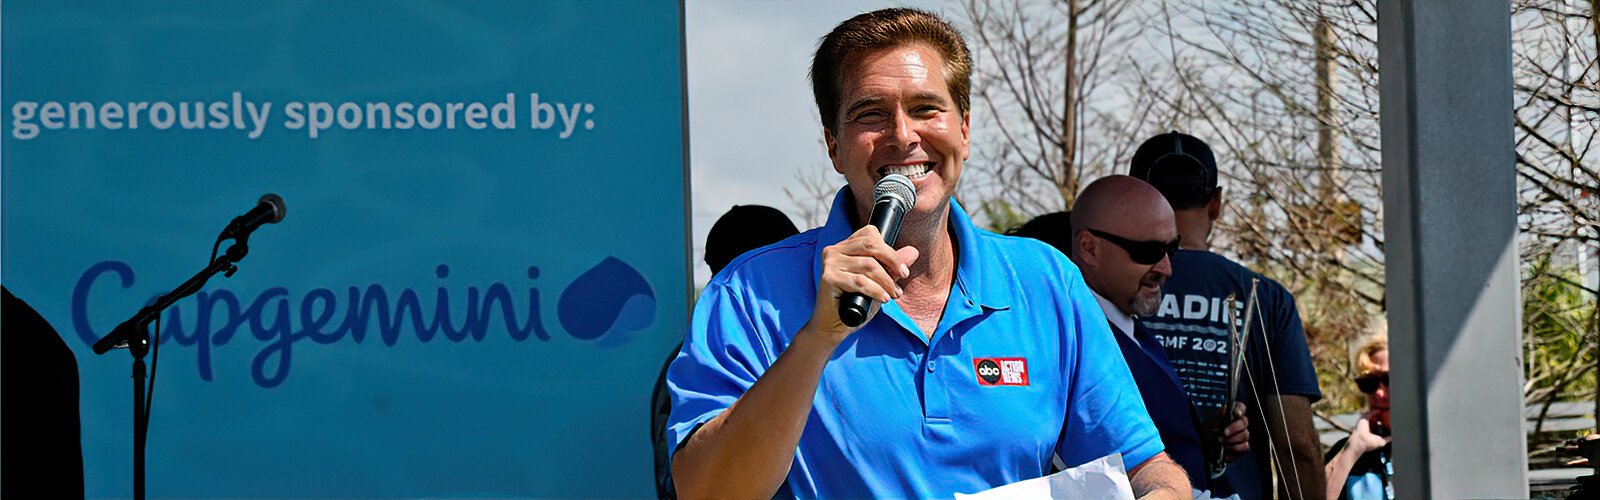 ABC Action News’ Chief Meteorologist Denis Phillips enthusiastically serves as festival emcee, introducing the live entertainment program sponsored by Seminole Hard Rock and Capgemini. 